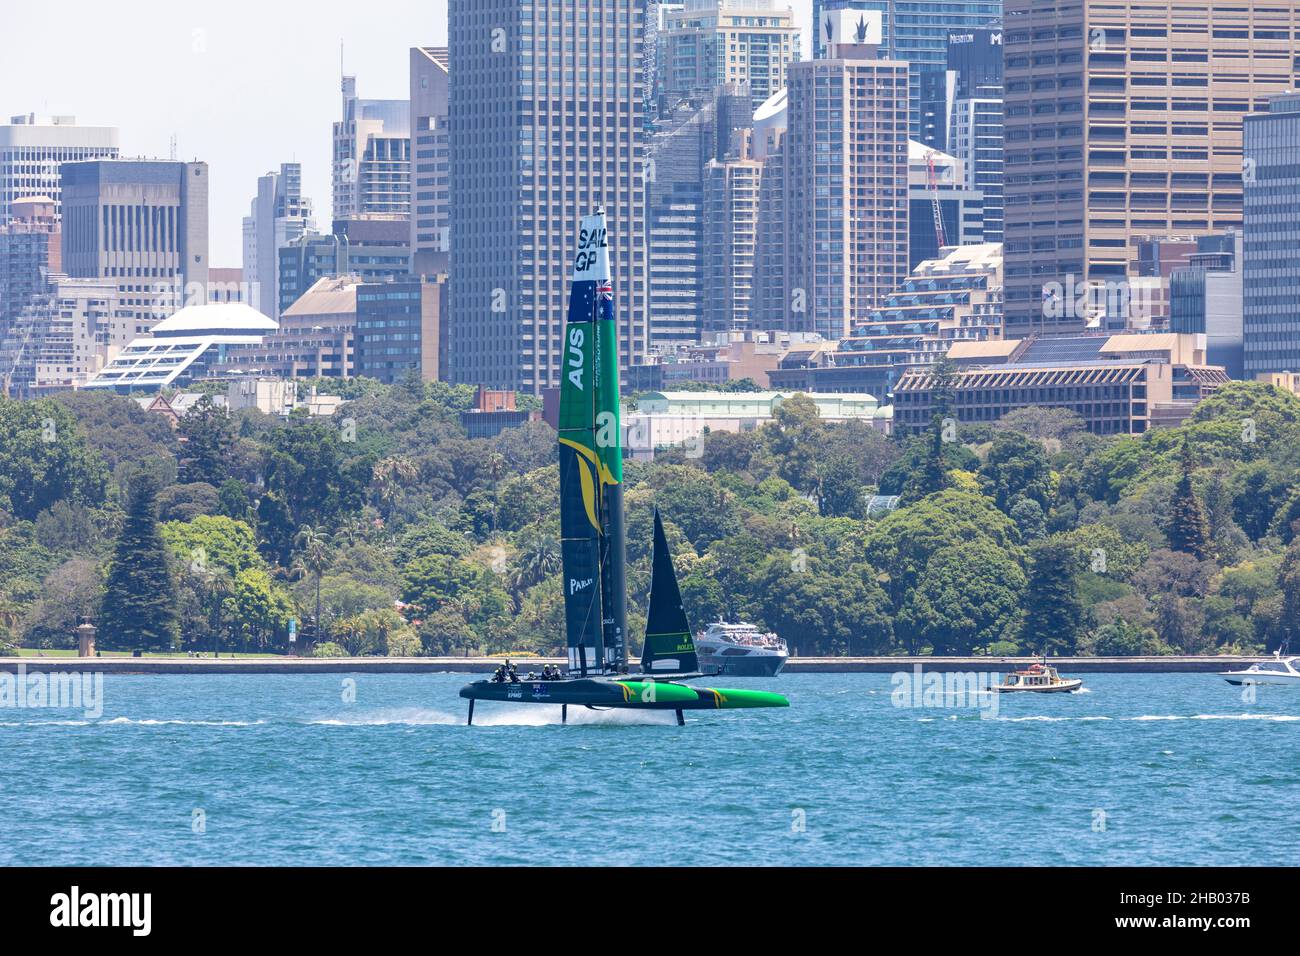 SailGP returns to Sydney harbour on 17th/18th December for the seventh event of season 2, pictured Season 1 champions Australia SailGP team helmed by Stock Photo